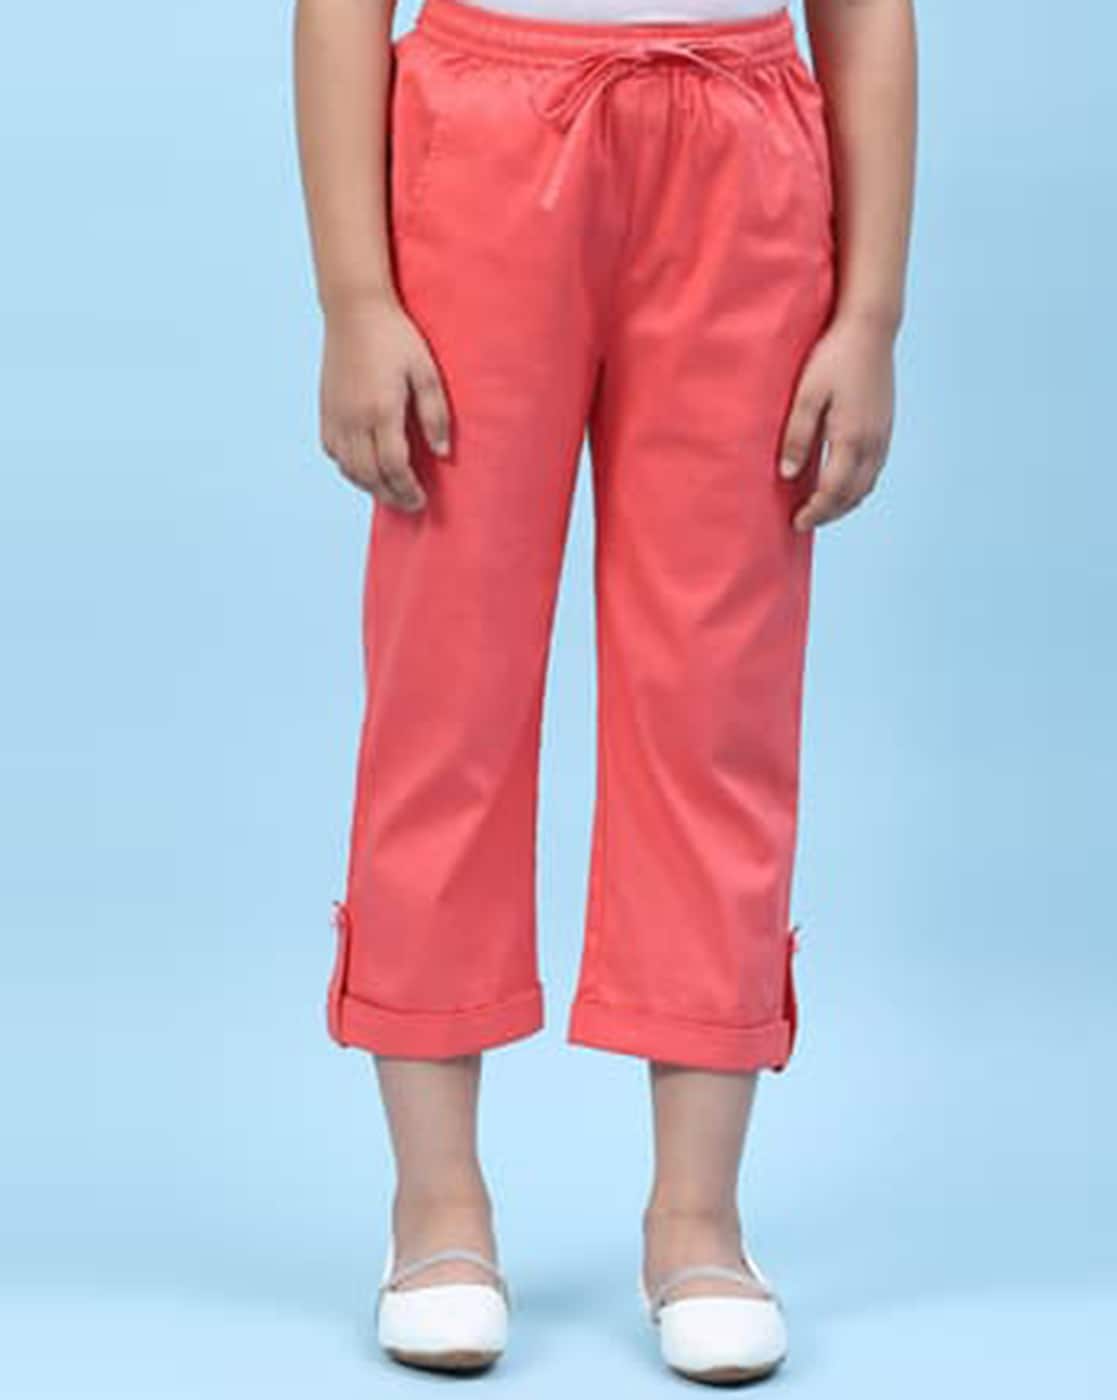 Buy Online Natural Cotton Flax Pants for Women  Girls at Best Prices in  Biba IndiaBOTTOMW16946SS21